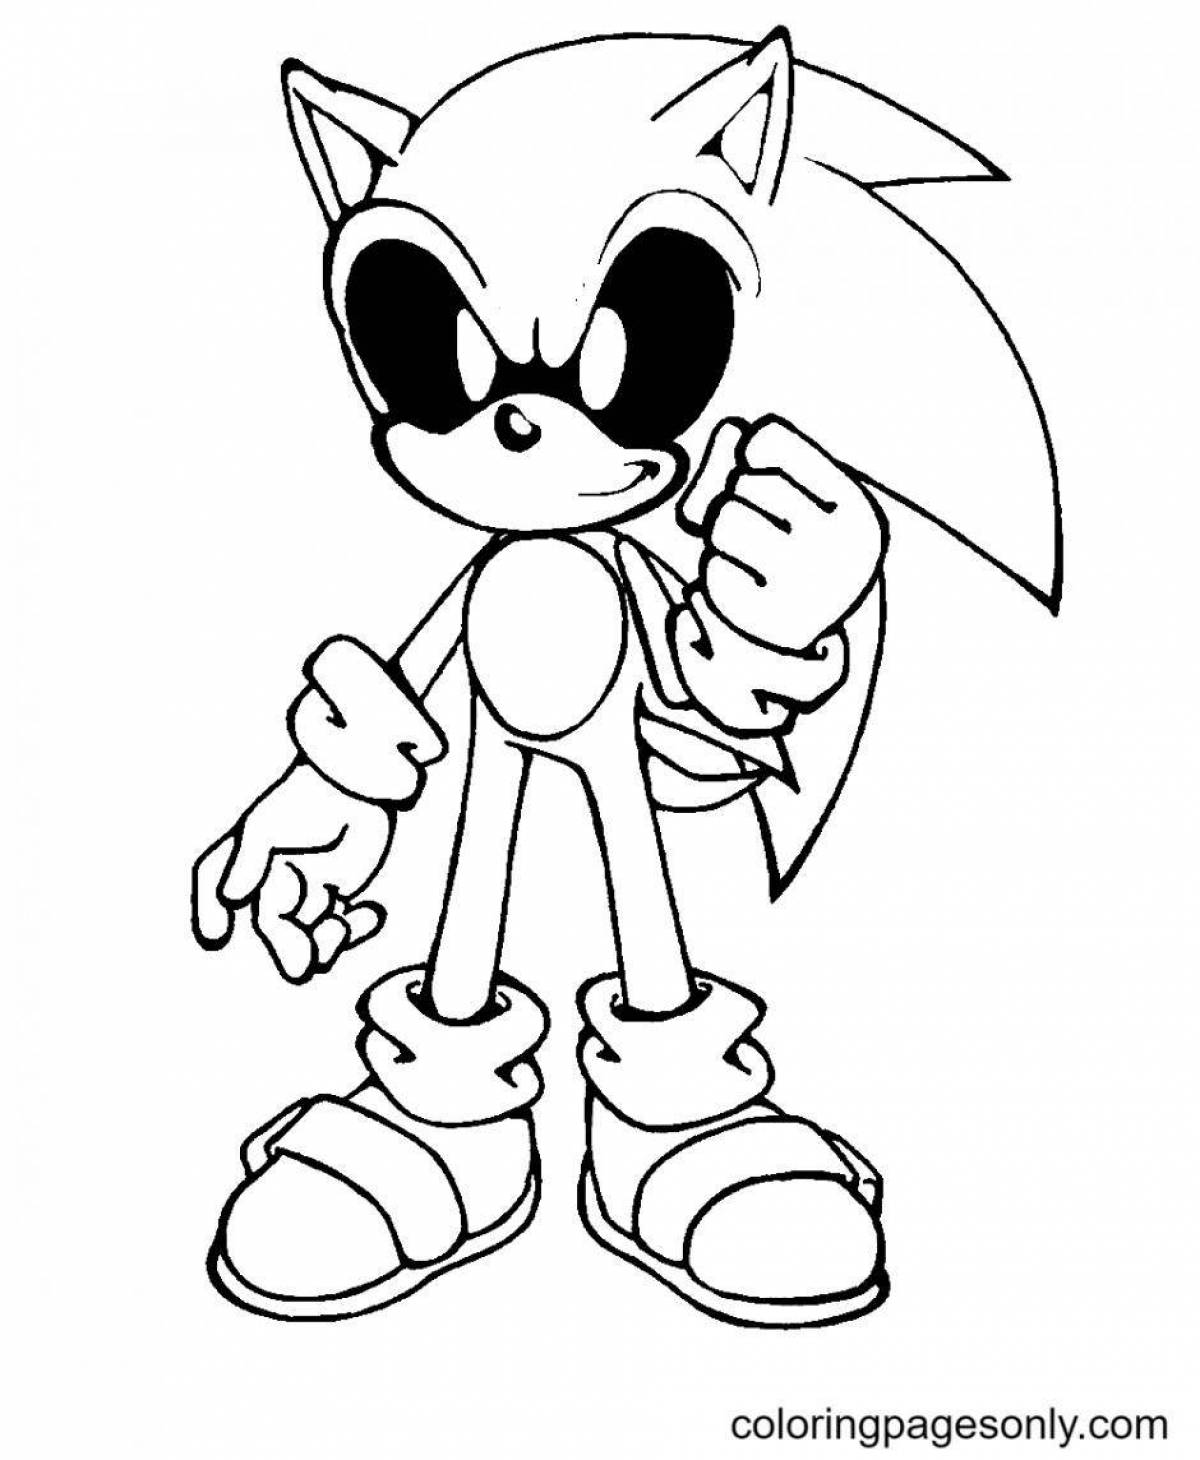 Fancy sonic coloring book for kids 5-6 years old